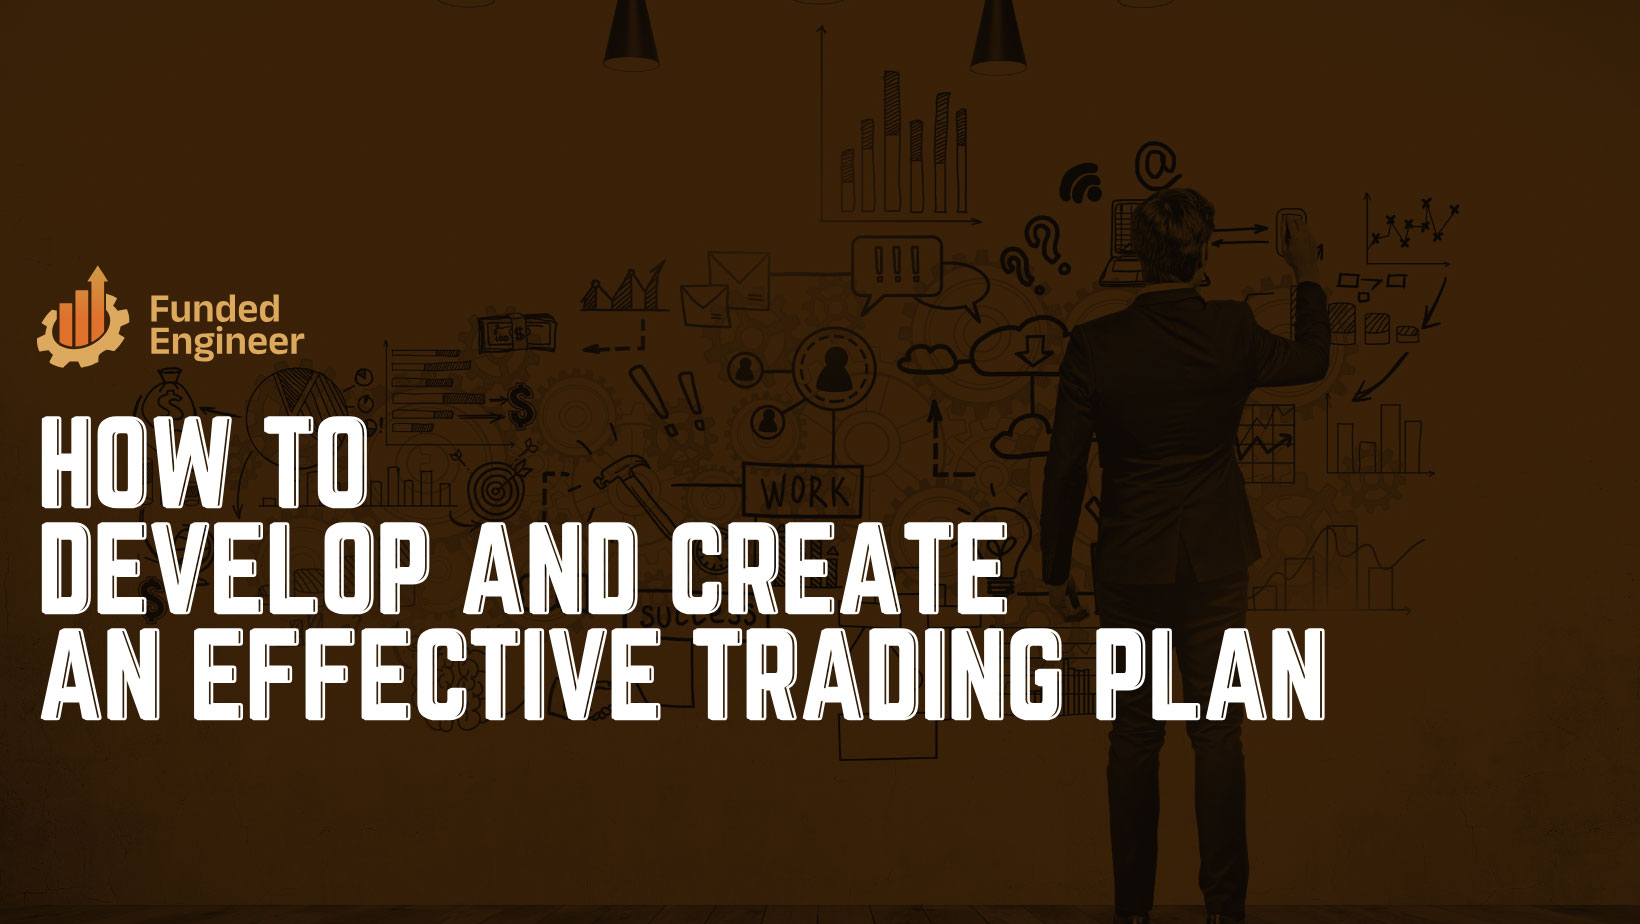 How to develop and create an effective trading plan